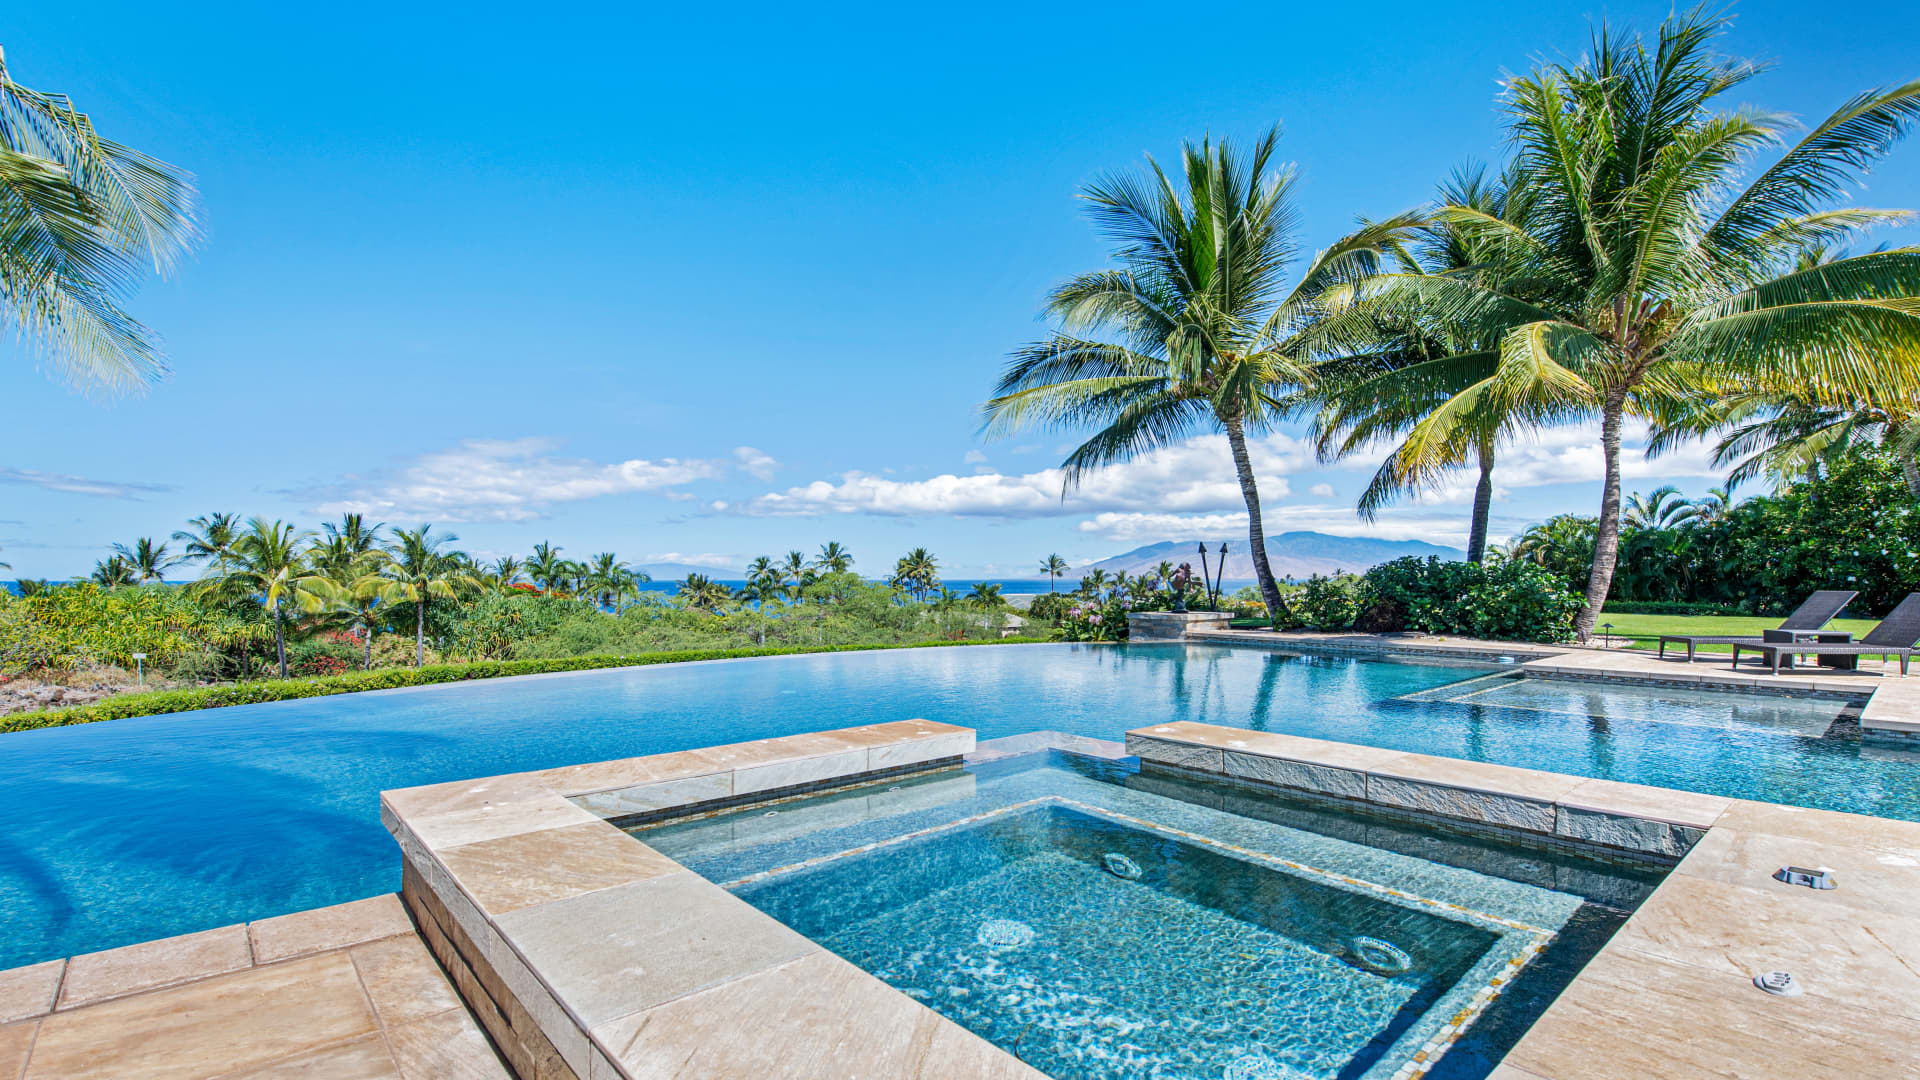 The view from the infinity pool of a Maui mansion that recently sold for $18 million.